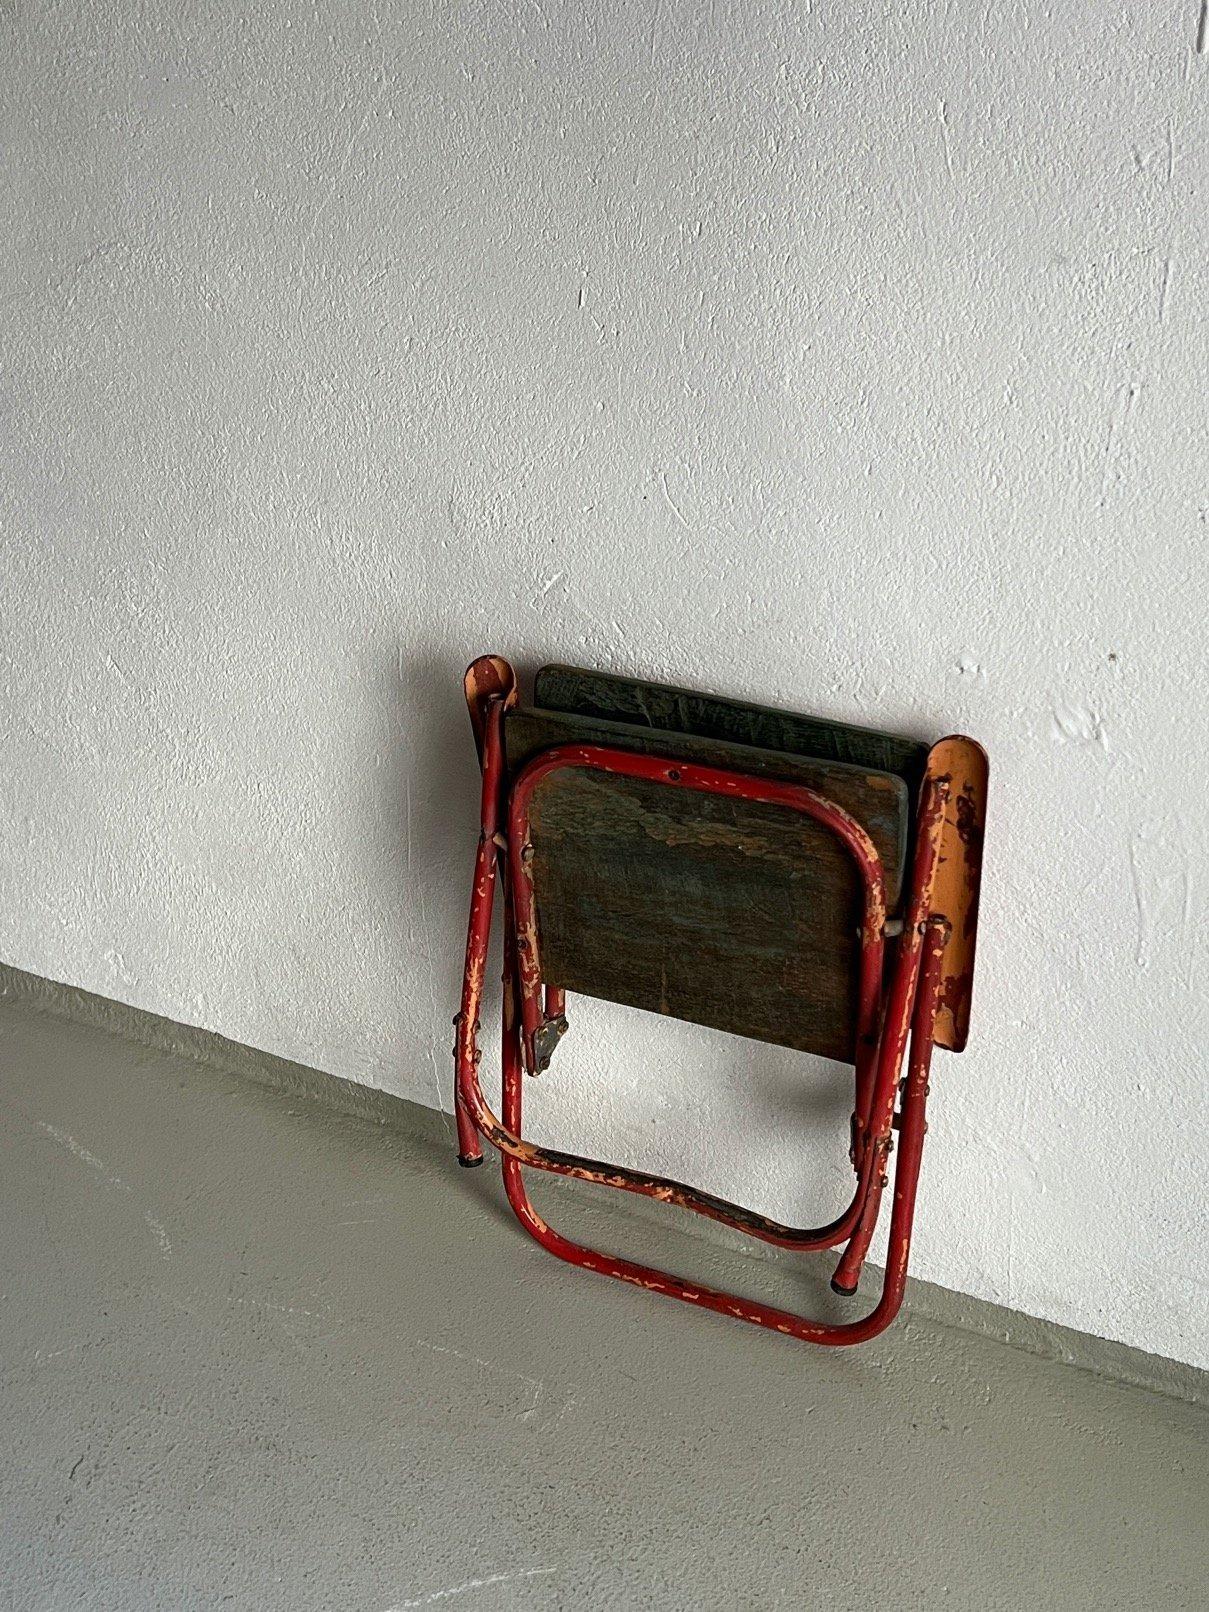 Wabi Sabi metal folding chair with red-painted metal frame and green-painted wooden details. Beautiful patina.

Additional information:
Place of origin - The Netherlands
Dimensions: 39 W x 42 D x 55 H cm
Seat: 28 H cm